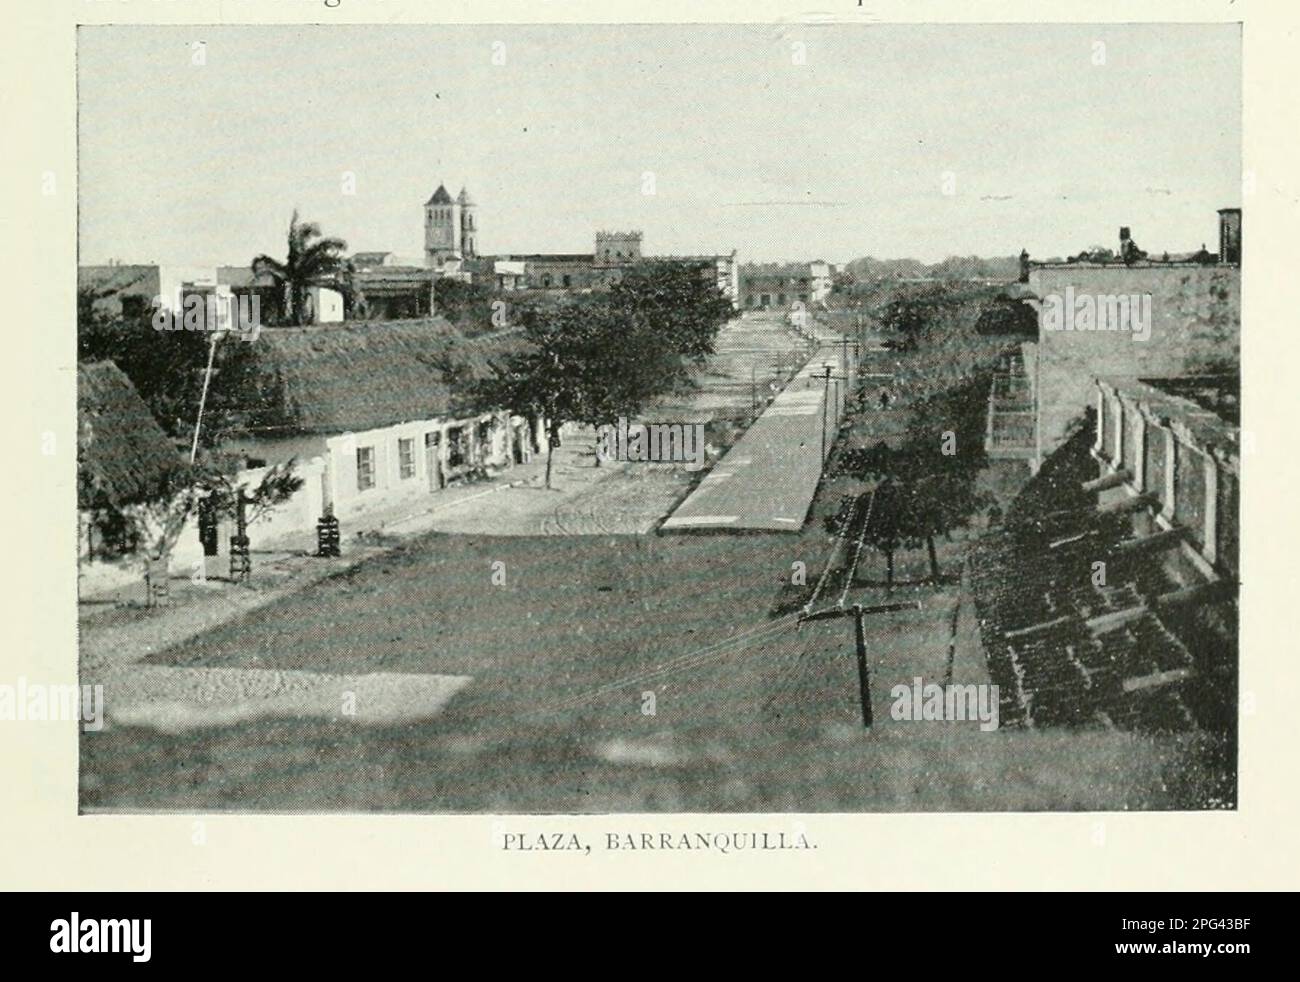 Plaza, Barranquilla from the Article BUSINESS OPPORTUNITIES IN COLOMBIA. By C. F. Z. Caracristi. from The Engineering Magazine DEVOTED TO INDUSTRIAL PROGRESS Volume IX April to September, 1895 NEW YORK The Engineering Magazine Co Stock Photo